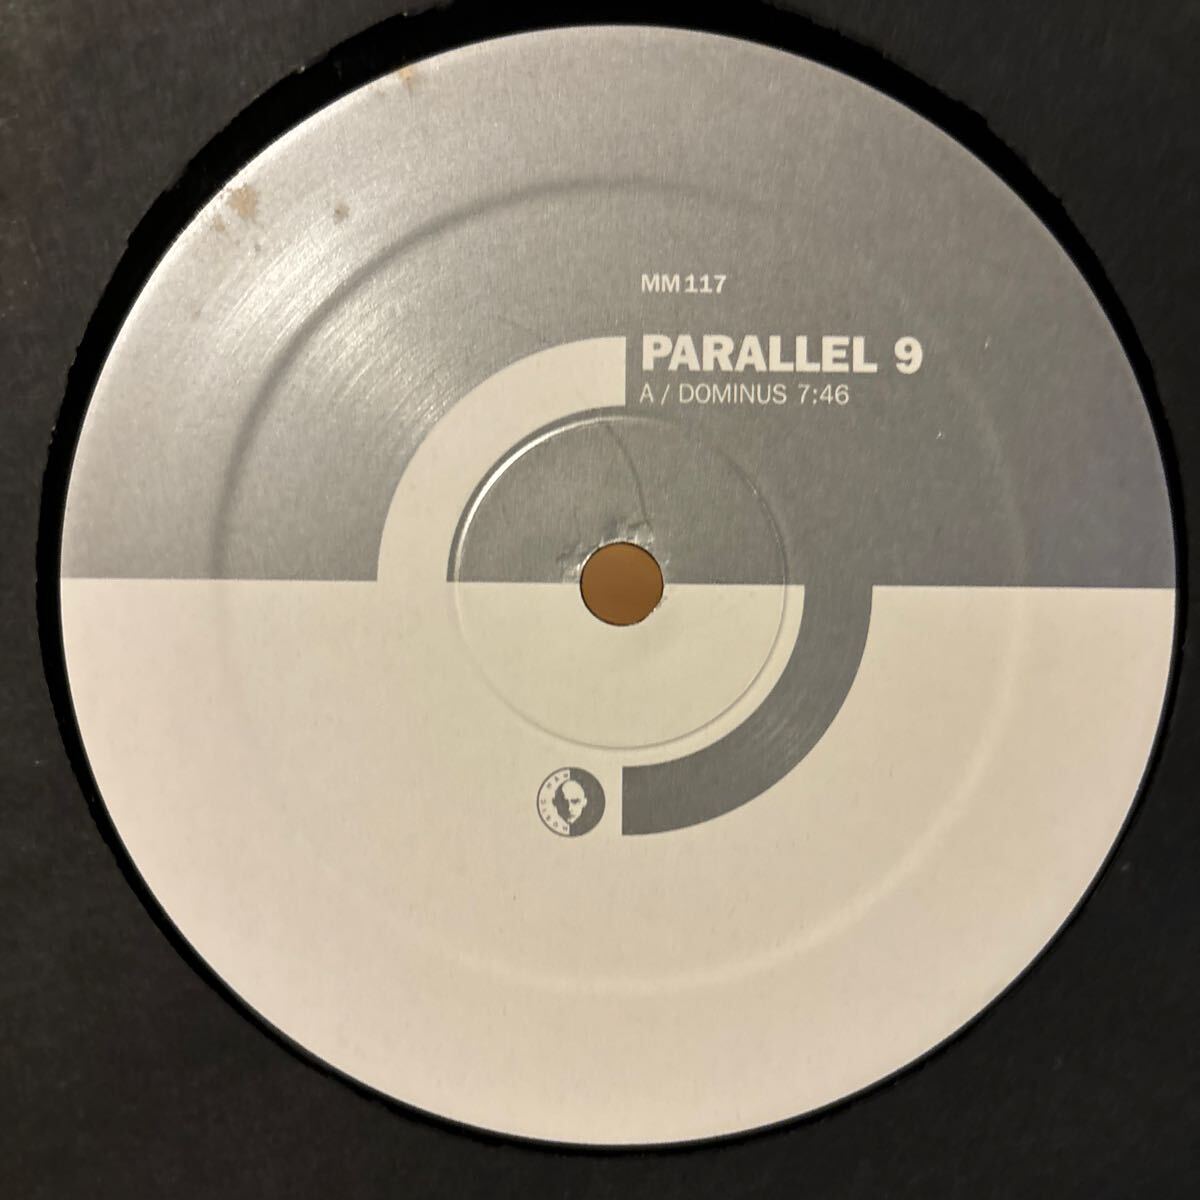 [ Parallel 9 - Dominus - Music Man Records MM 117 ] Steve Rachmad/Sterac_画像1